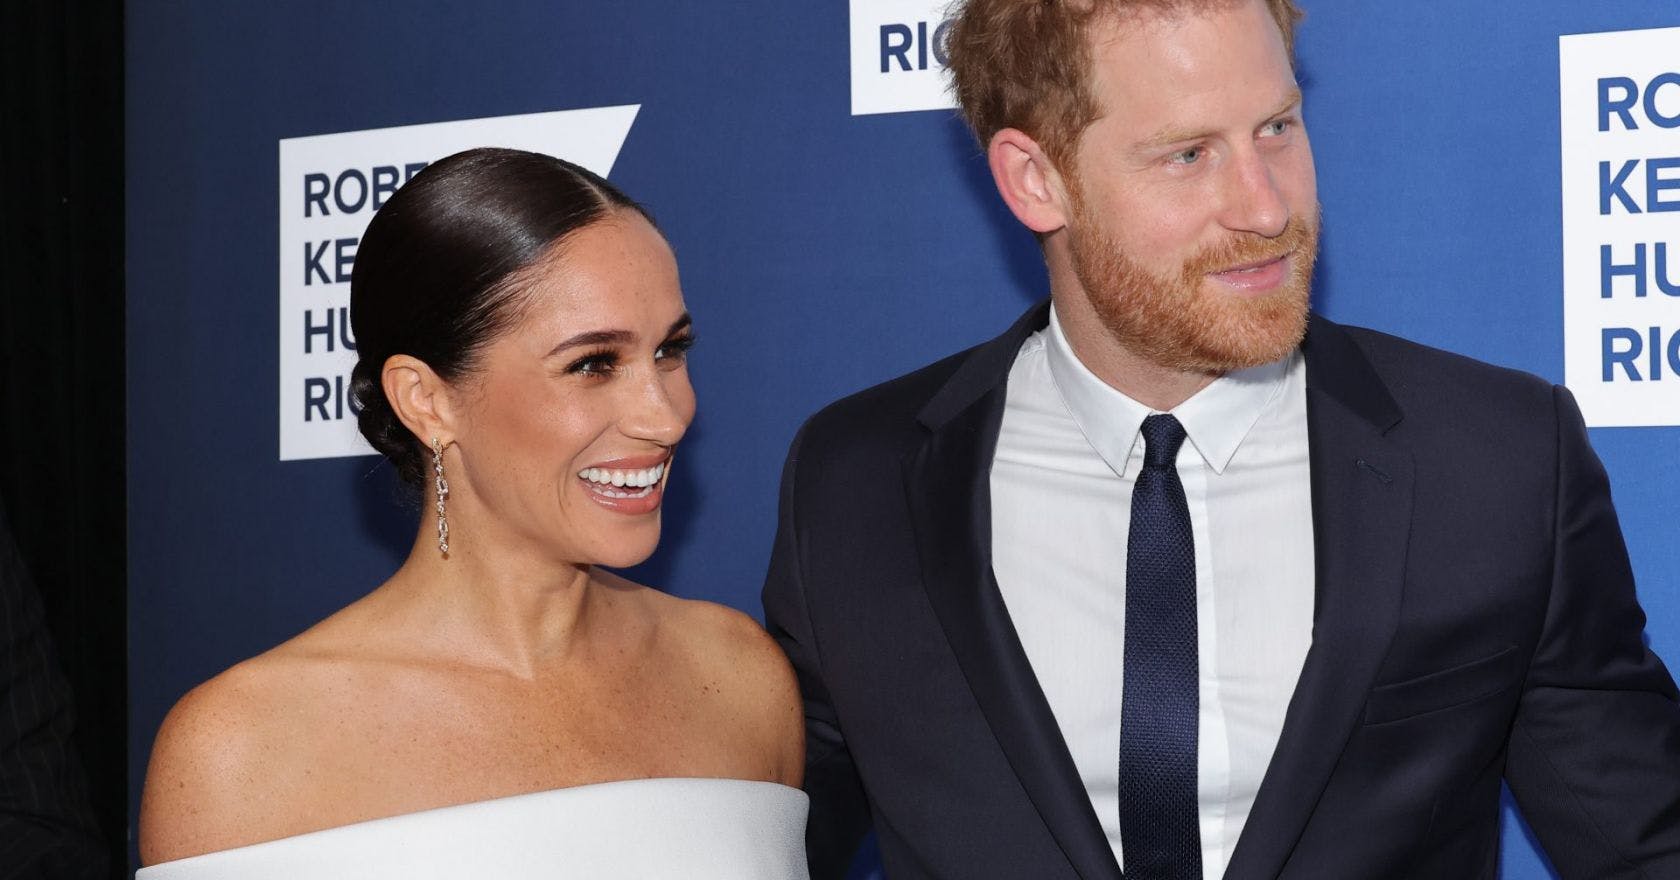 Harry And Meghan Have Won The Ripple Of Hope Human Rights Award 2029